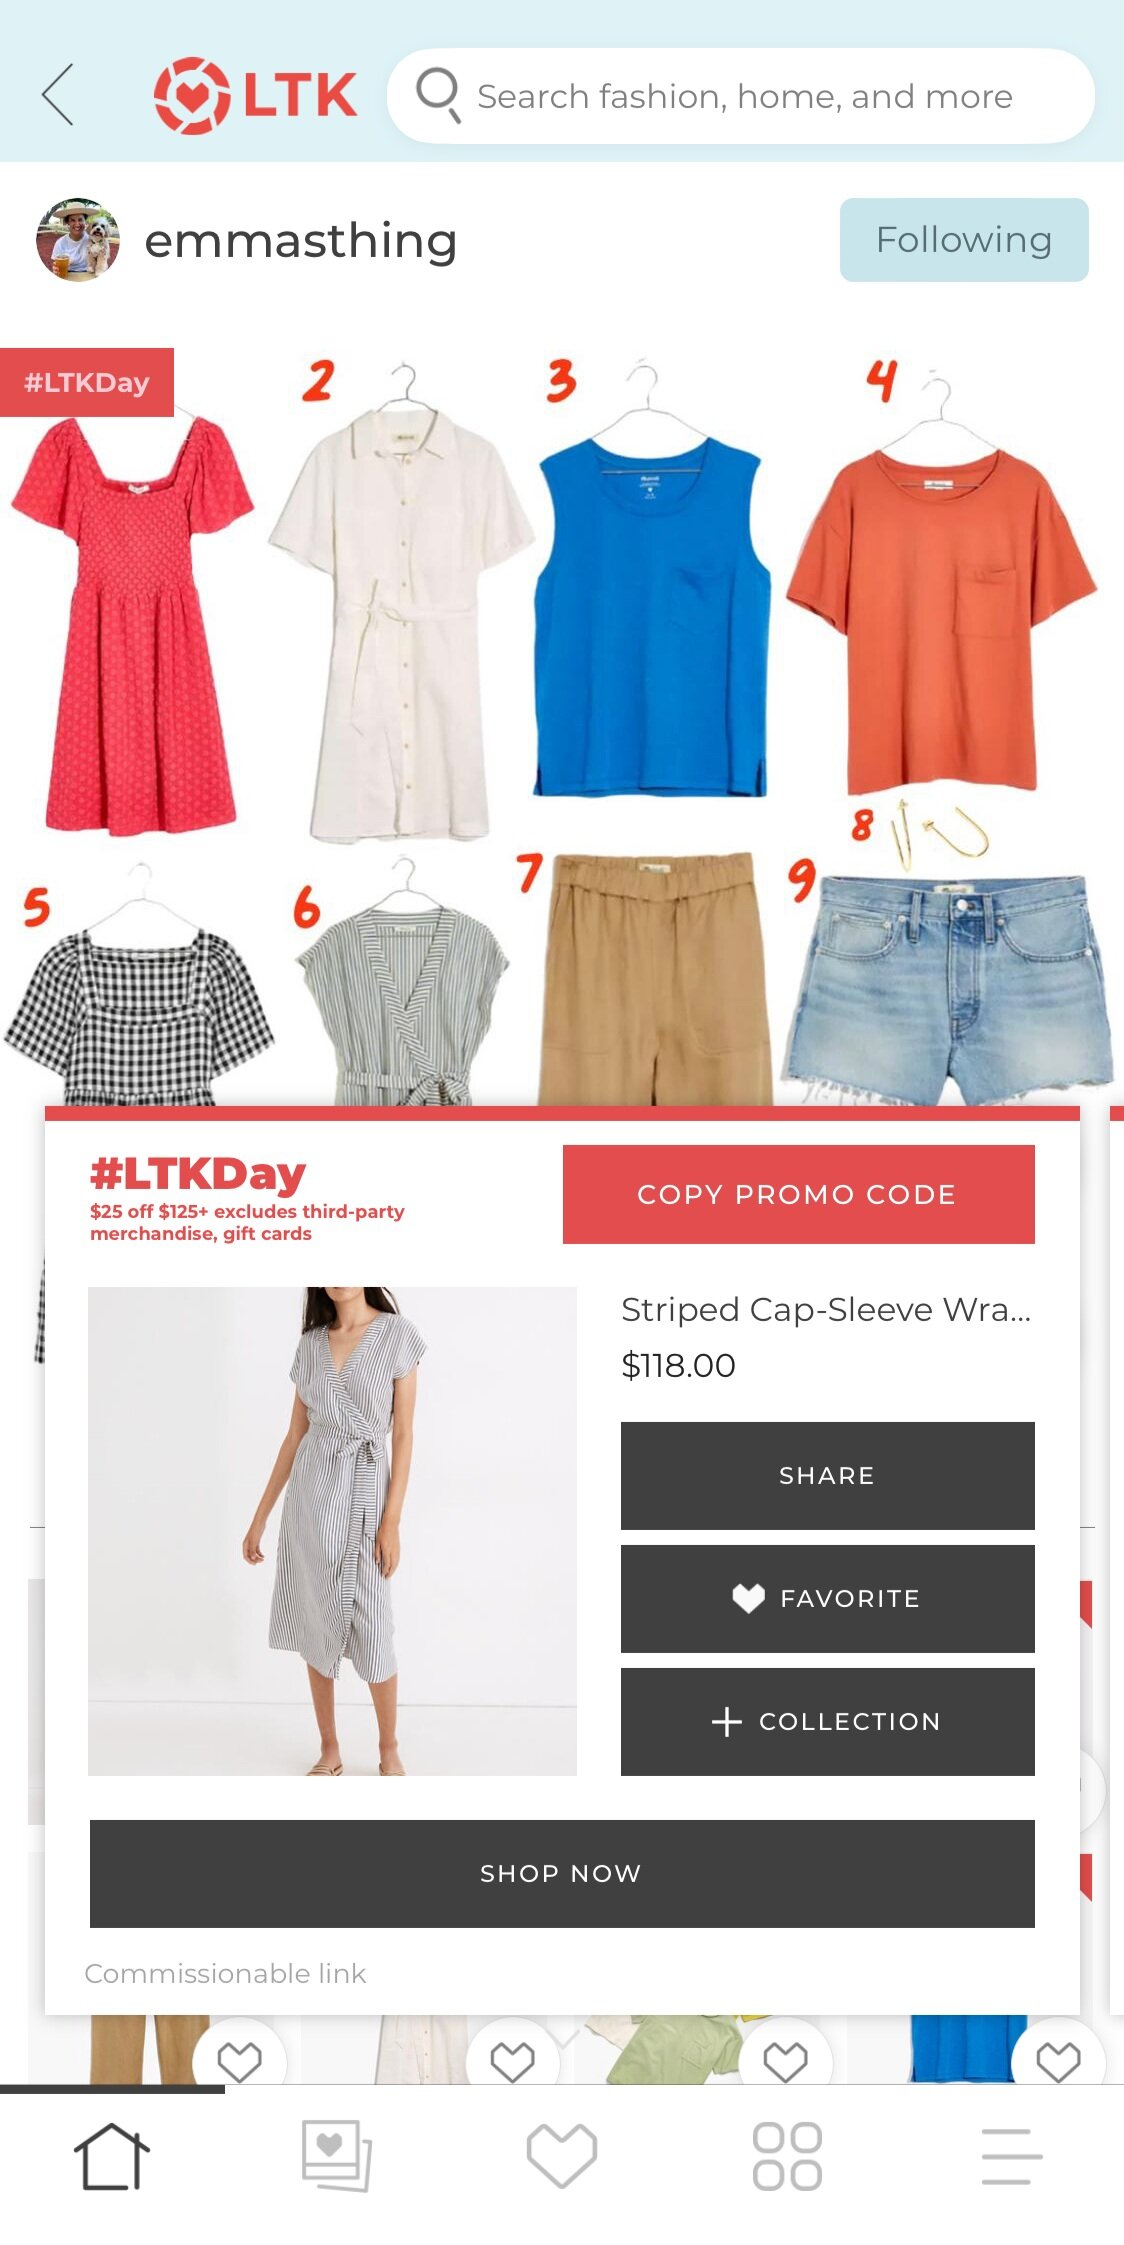 LTK Day 2021: What's In My Cart(s) — emmasthing